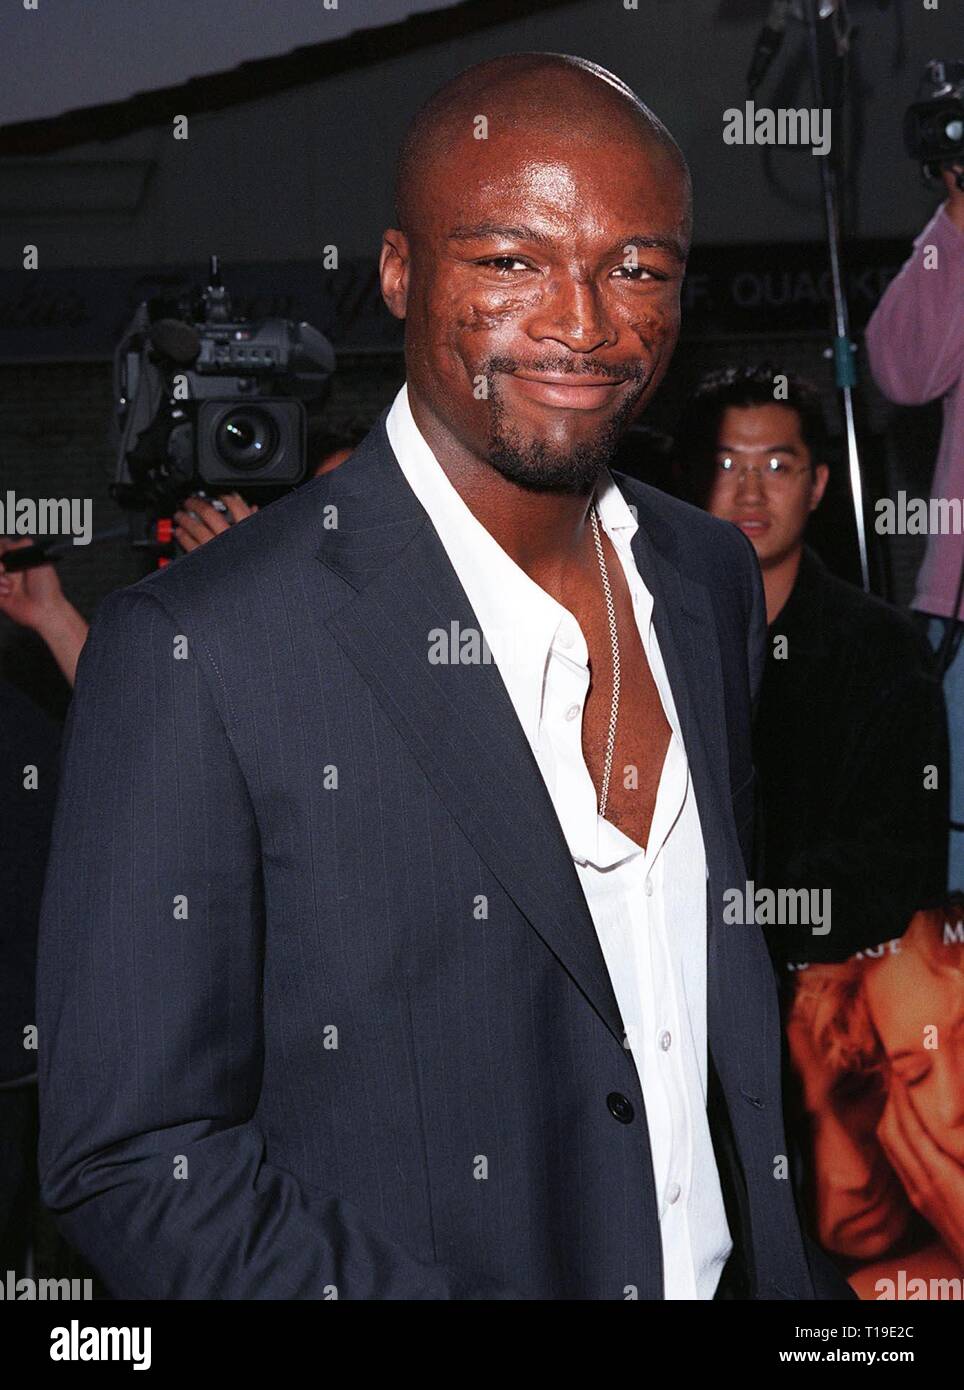 LOS ANGELES, CA - April 8, 1998: Pop star SEAL at the world premiere of  "City of Angels," which stars Nicolas Cage & Meg Ryan Stock Photo - Alamy